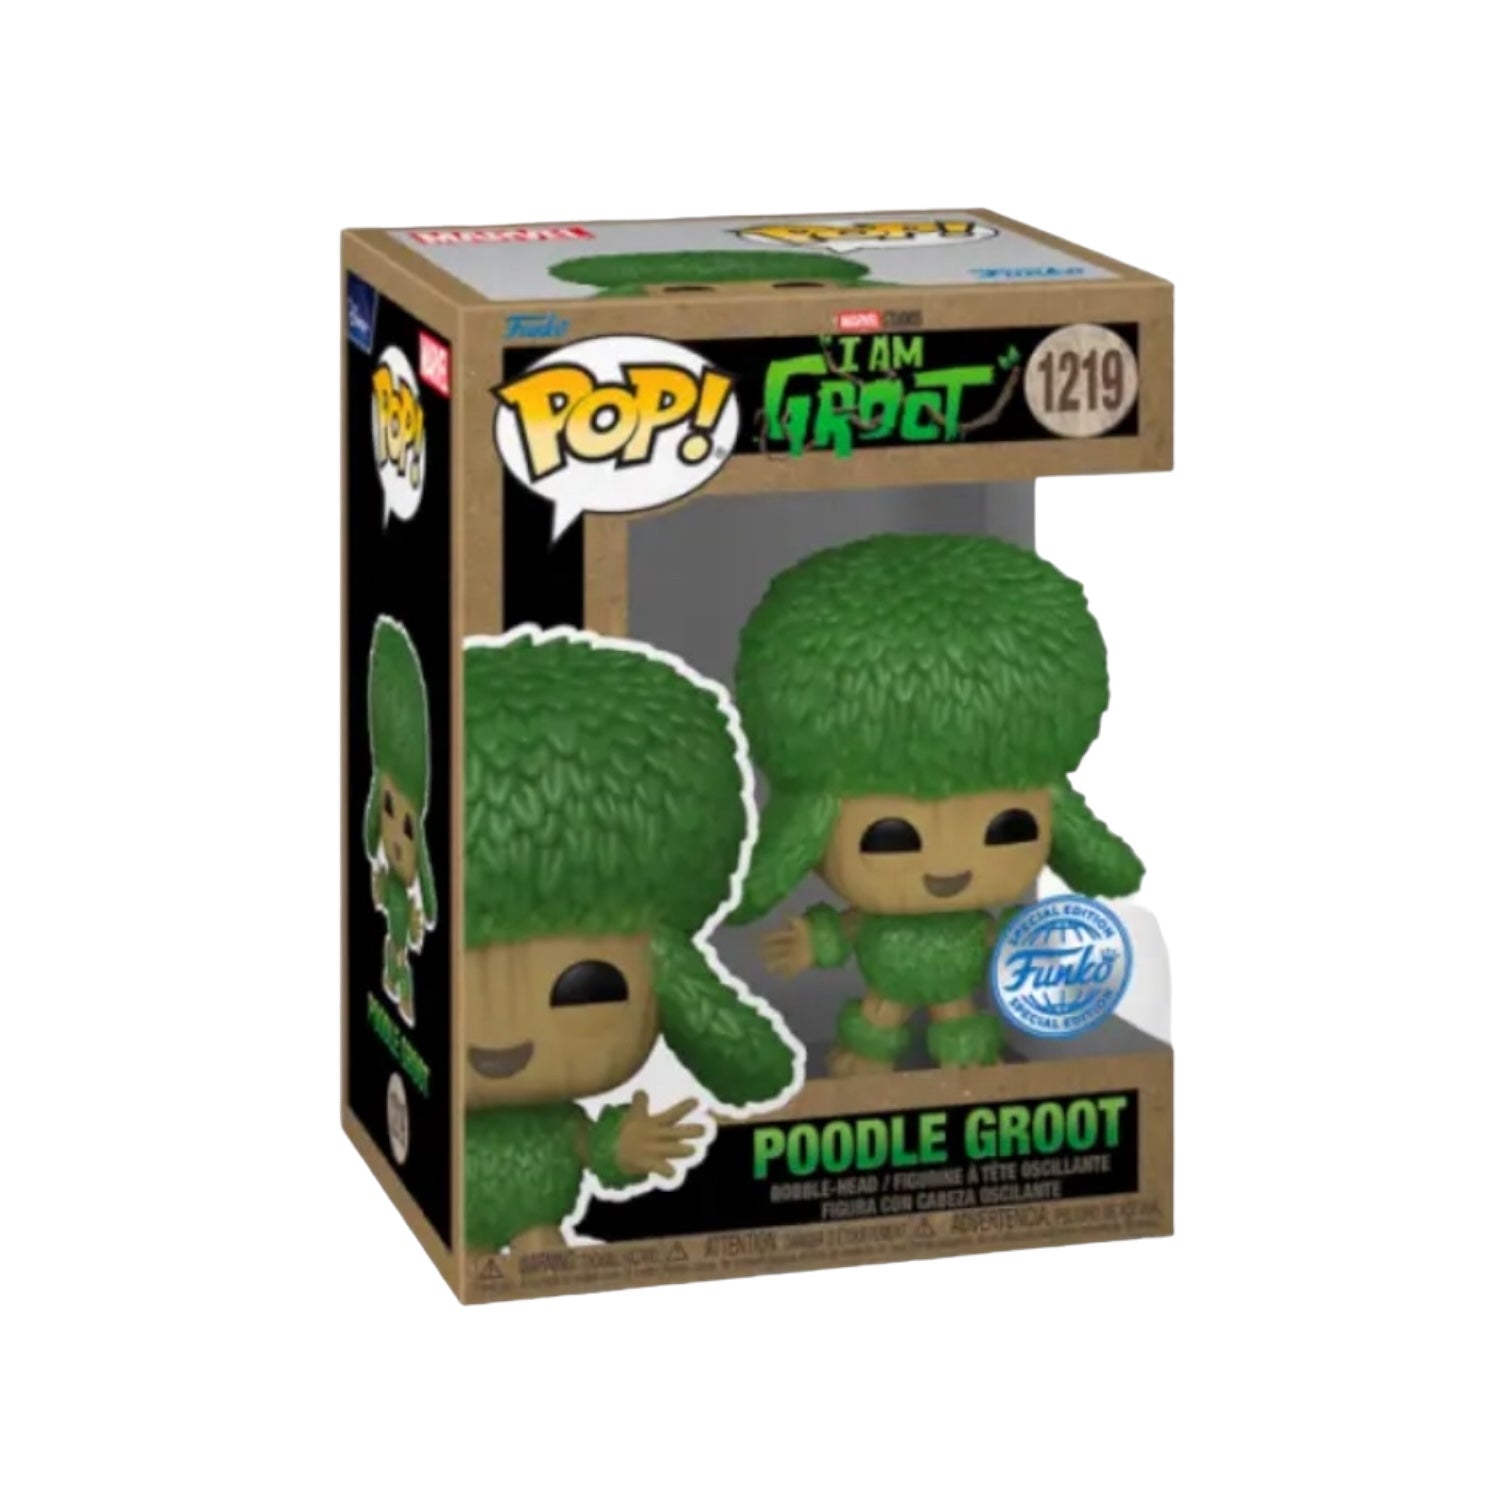 Poodle Groot #1219 Funko Pop! - I am Groot - Funko Special Edition